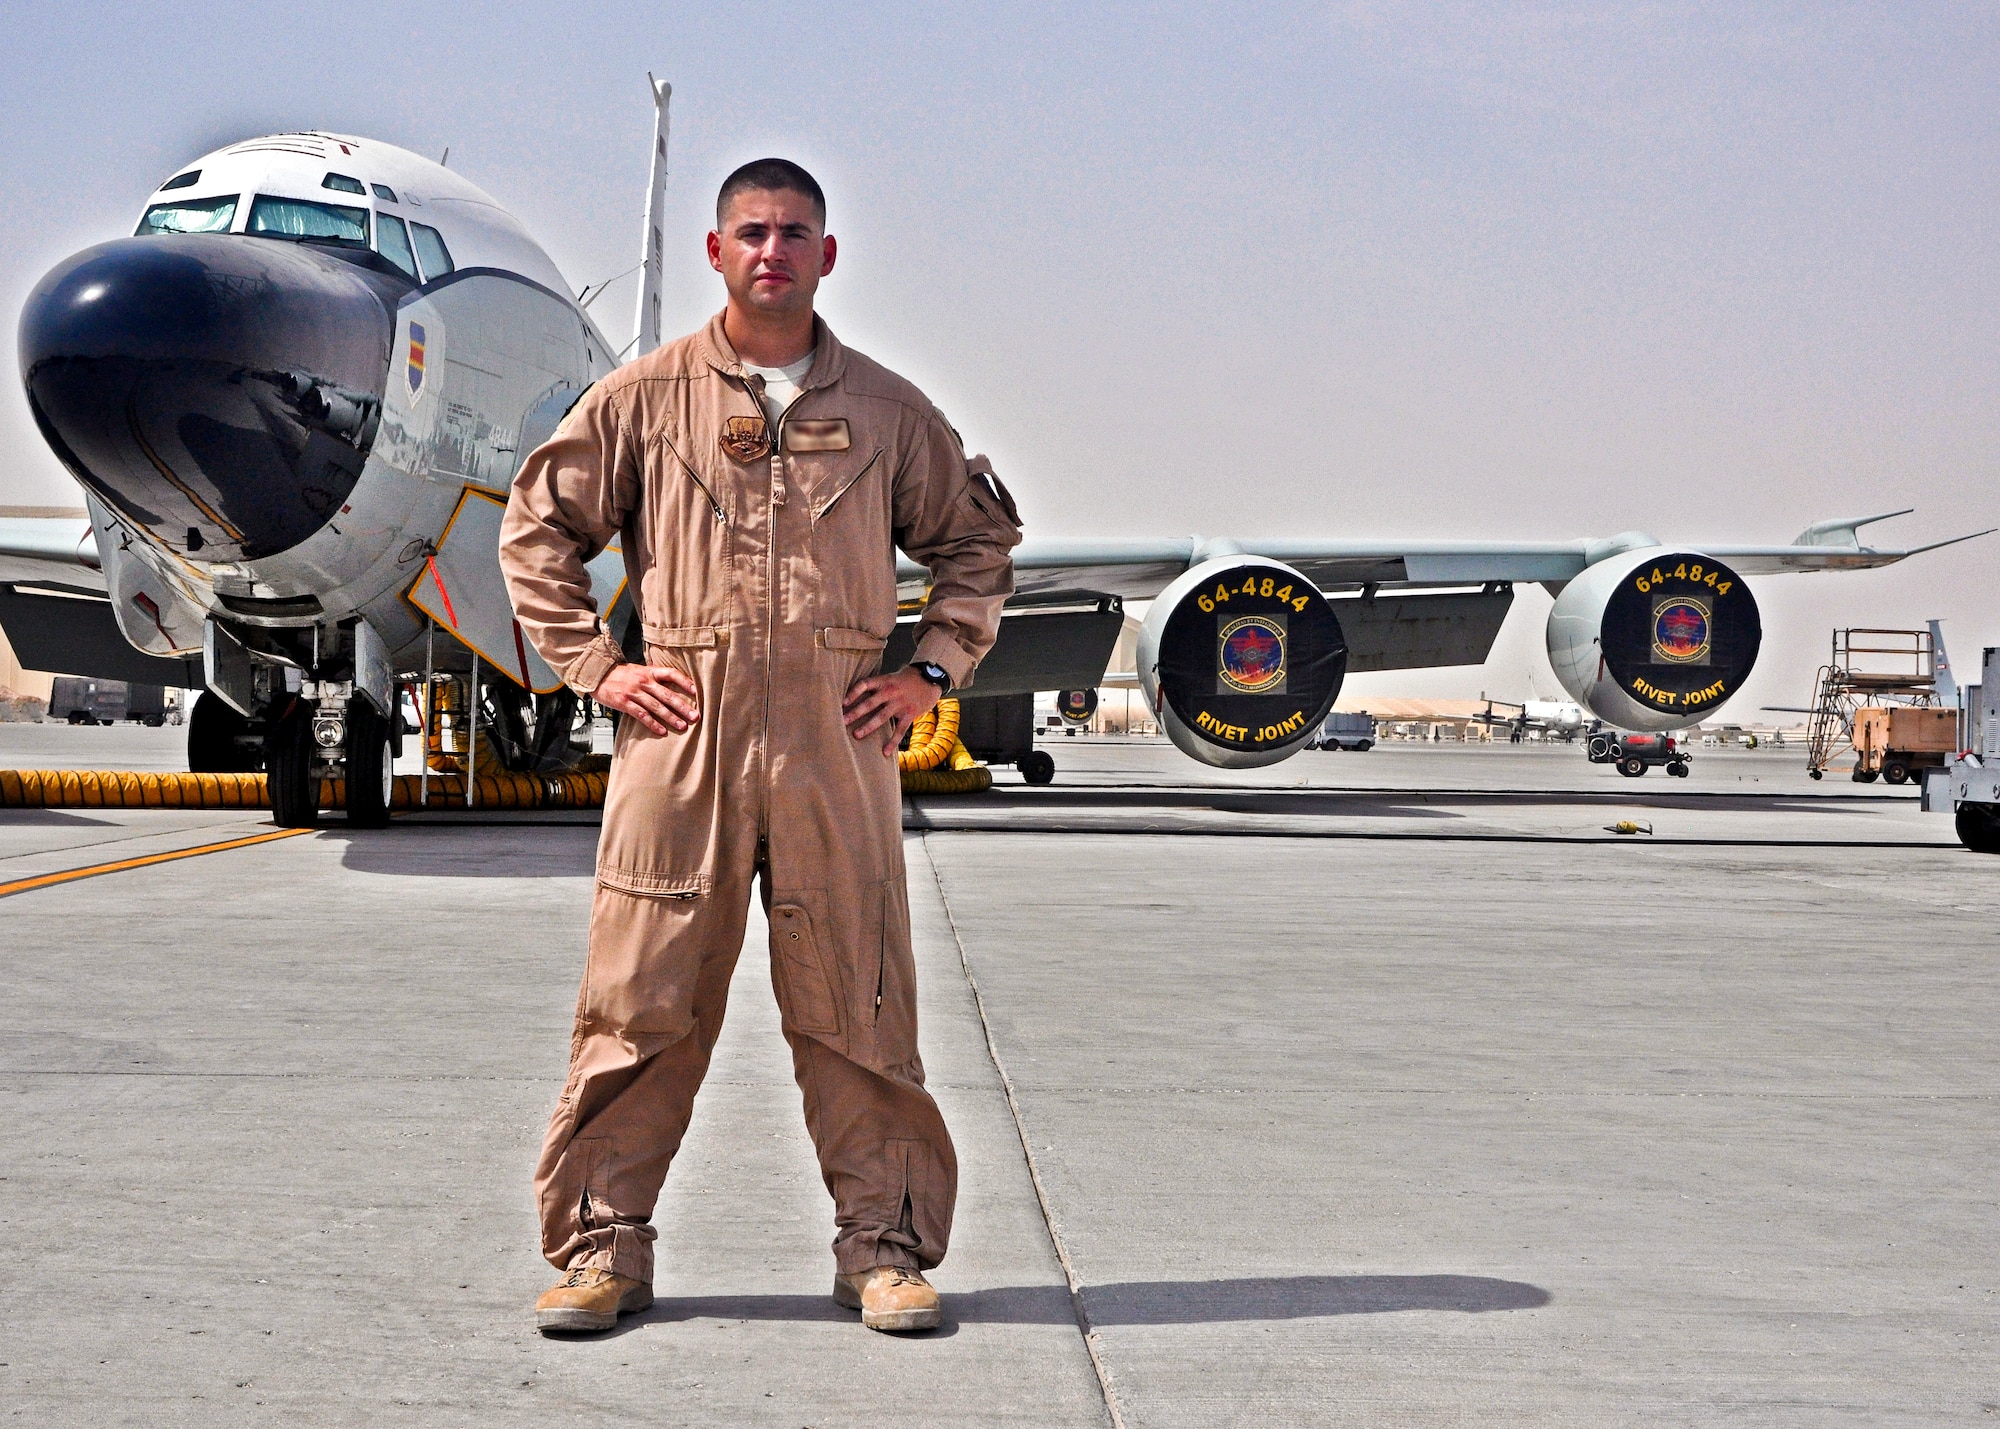 Staff Sgt. Chris poses in front of the RC-135 Rivet Joint at the 379th Air Expeditionary Wing in Southwest Asia, July 16, 2013. Chris is a career enlisted aviator who has flown more than 2,000 hours and more than 400 combat sorties, and is assigned to Offutt Air Force Base, Neb. (U.S. Air Force photo/1st Lt. Susan Harrington)